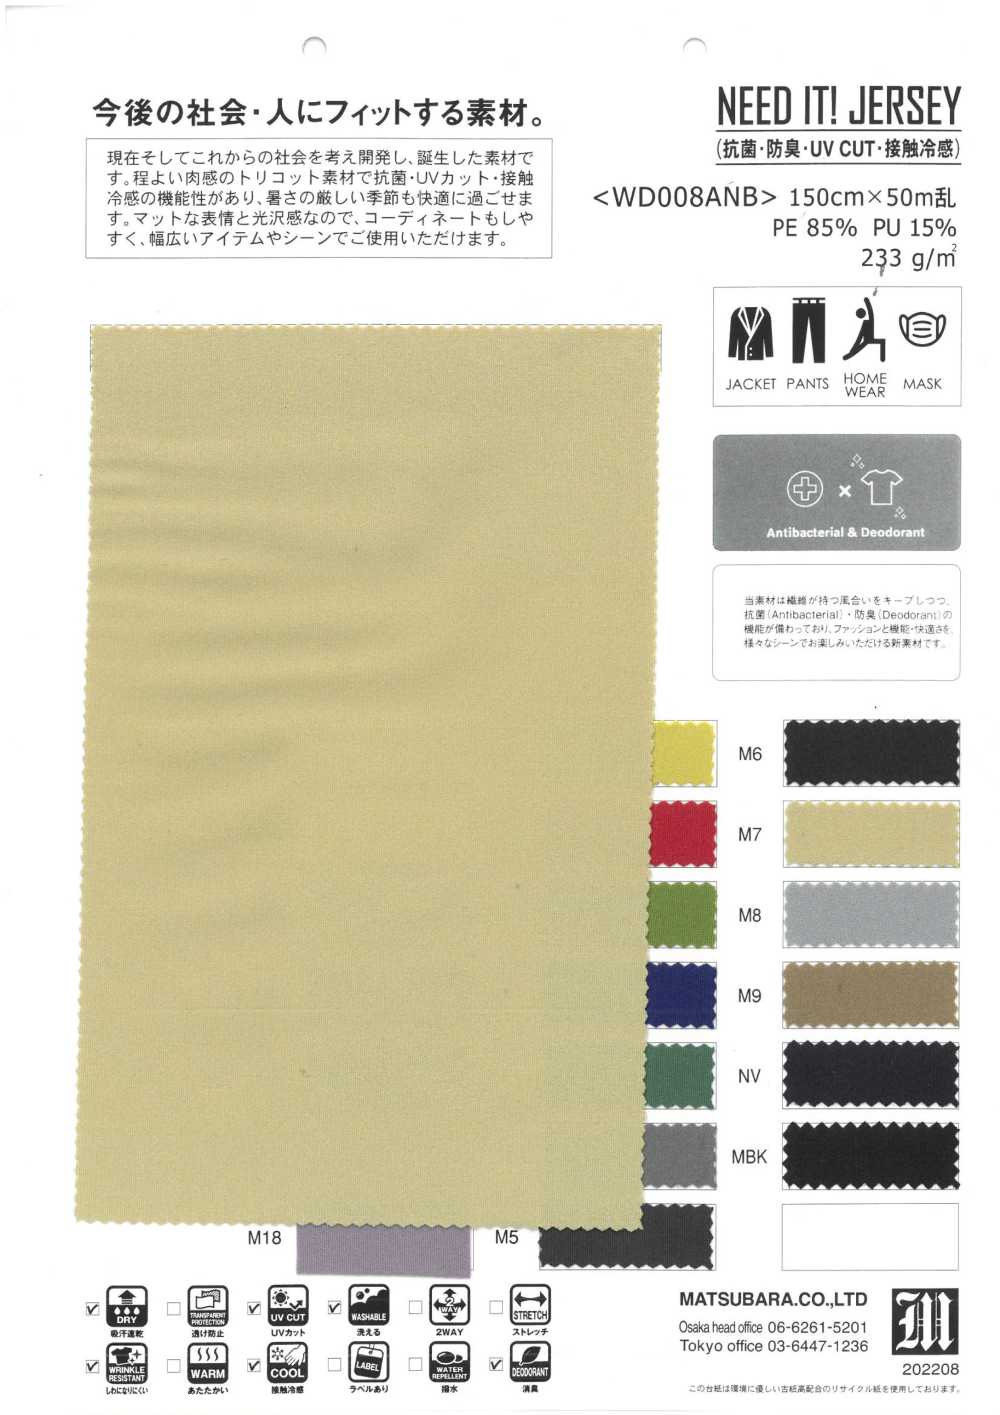 WD008ANB NEED IT! JERSEY (Antibacterial, Deodorant, UV CUT Cool To The Touch)[Textile / Fabric] Matsubara